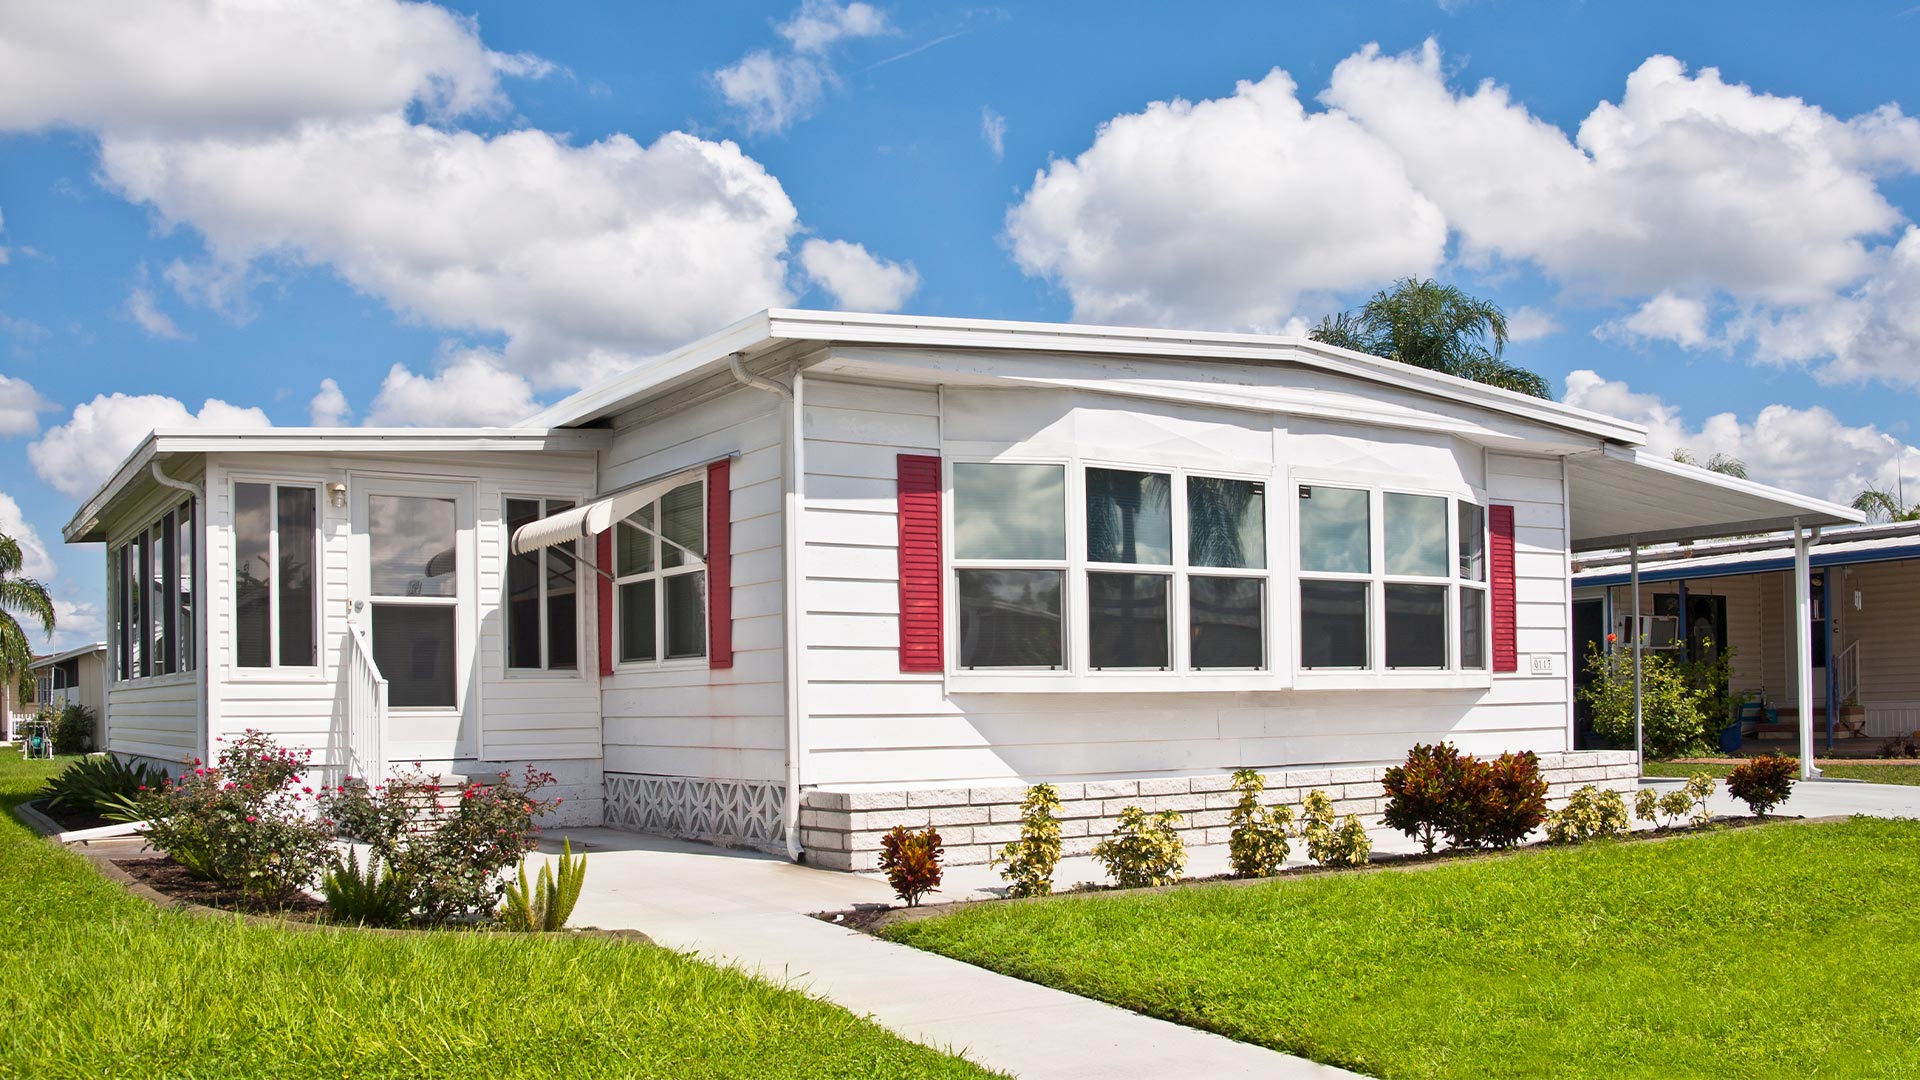 Mobile Home Refinancing Loan Options And Requirements